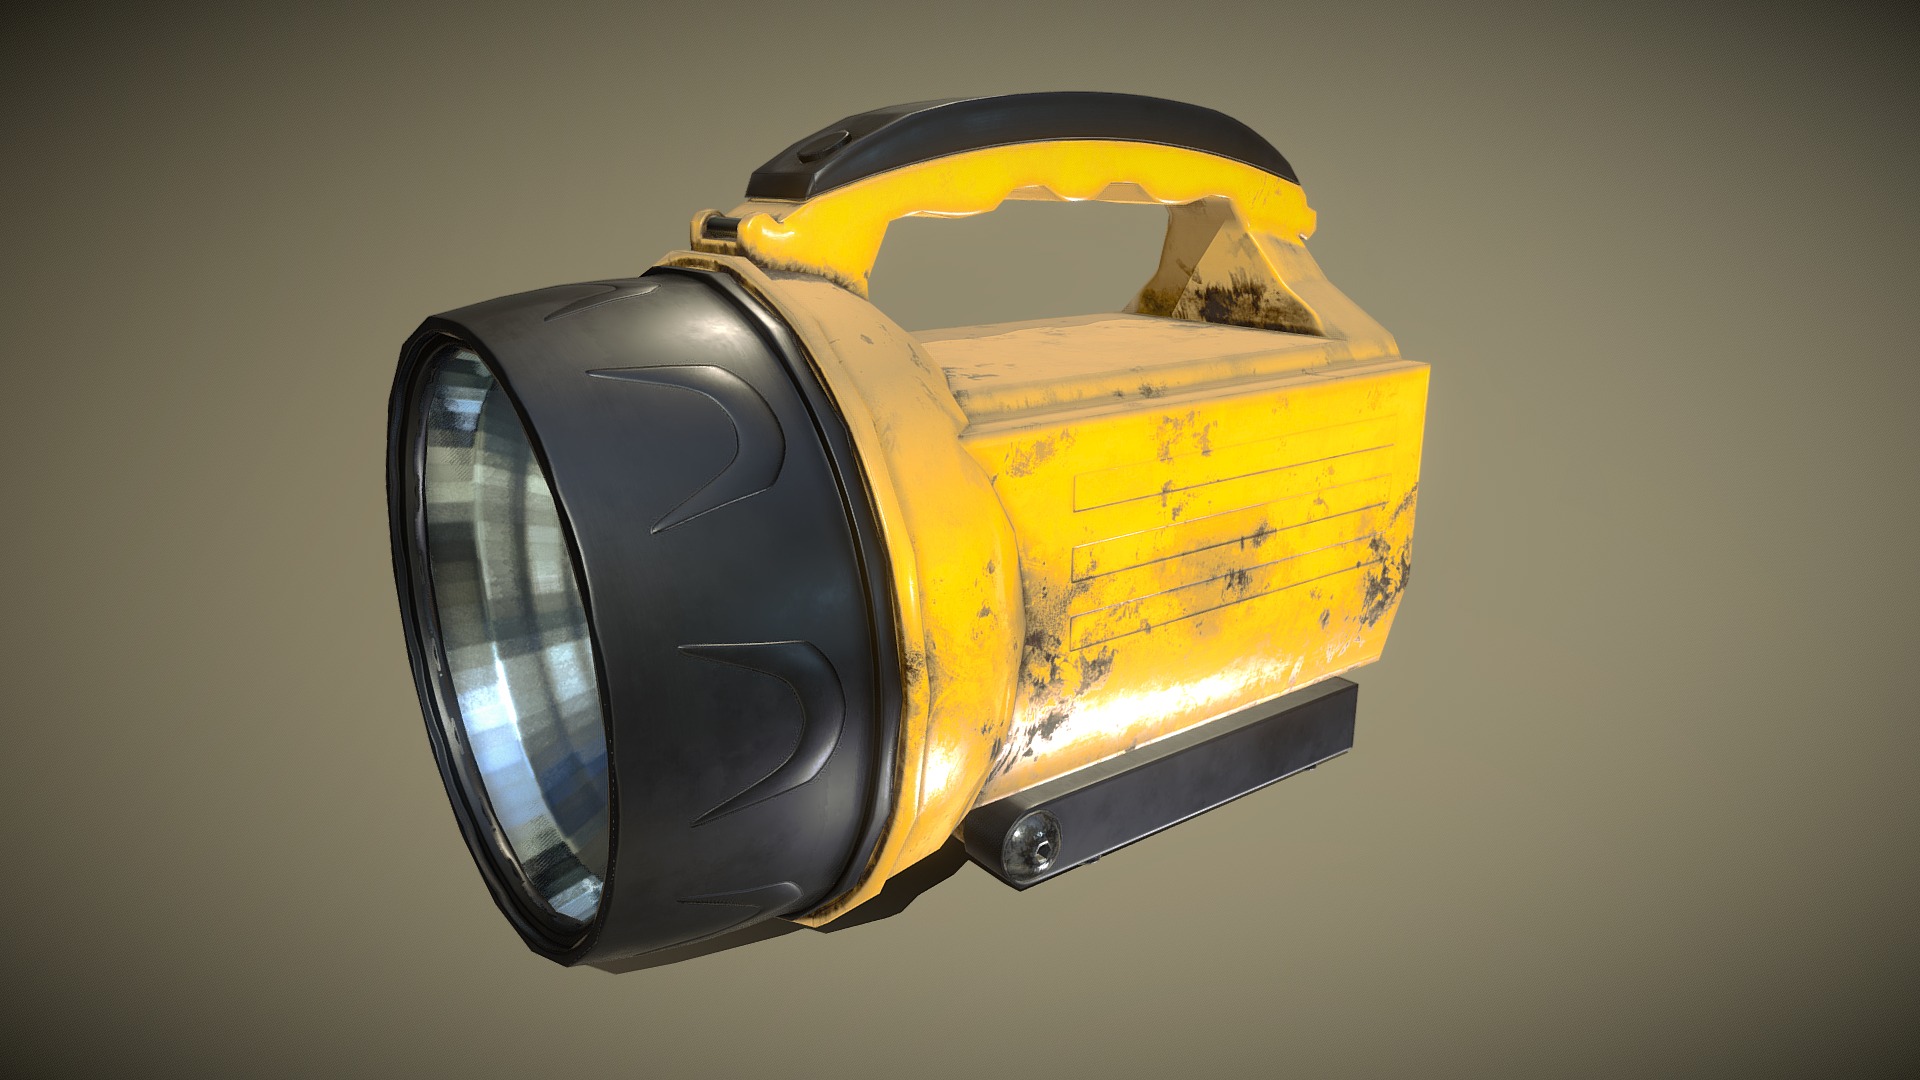 3D model Flashlight Camping – PBR Game Ready - This is a 3D model of the Flashlight Camping - PBR Game Ready. The 3D model is about a yellow and black helmet.